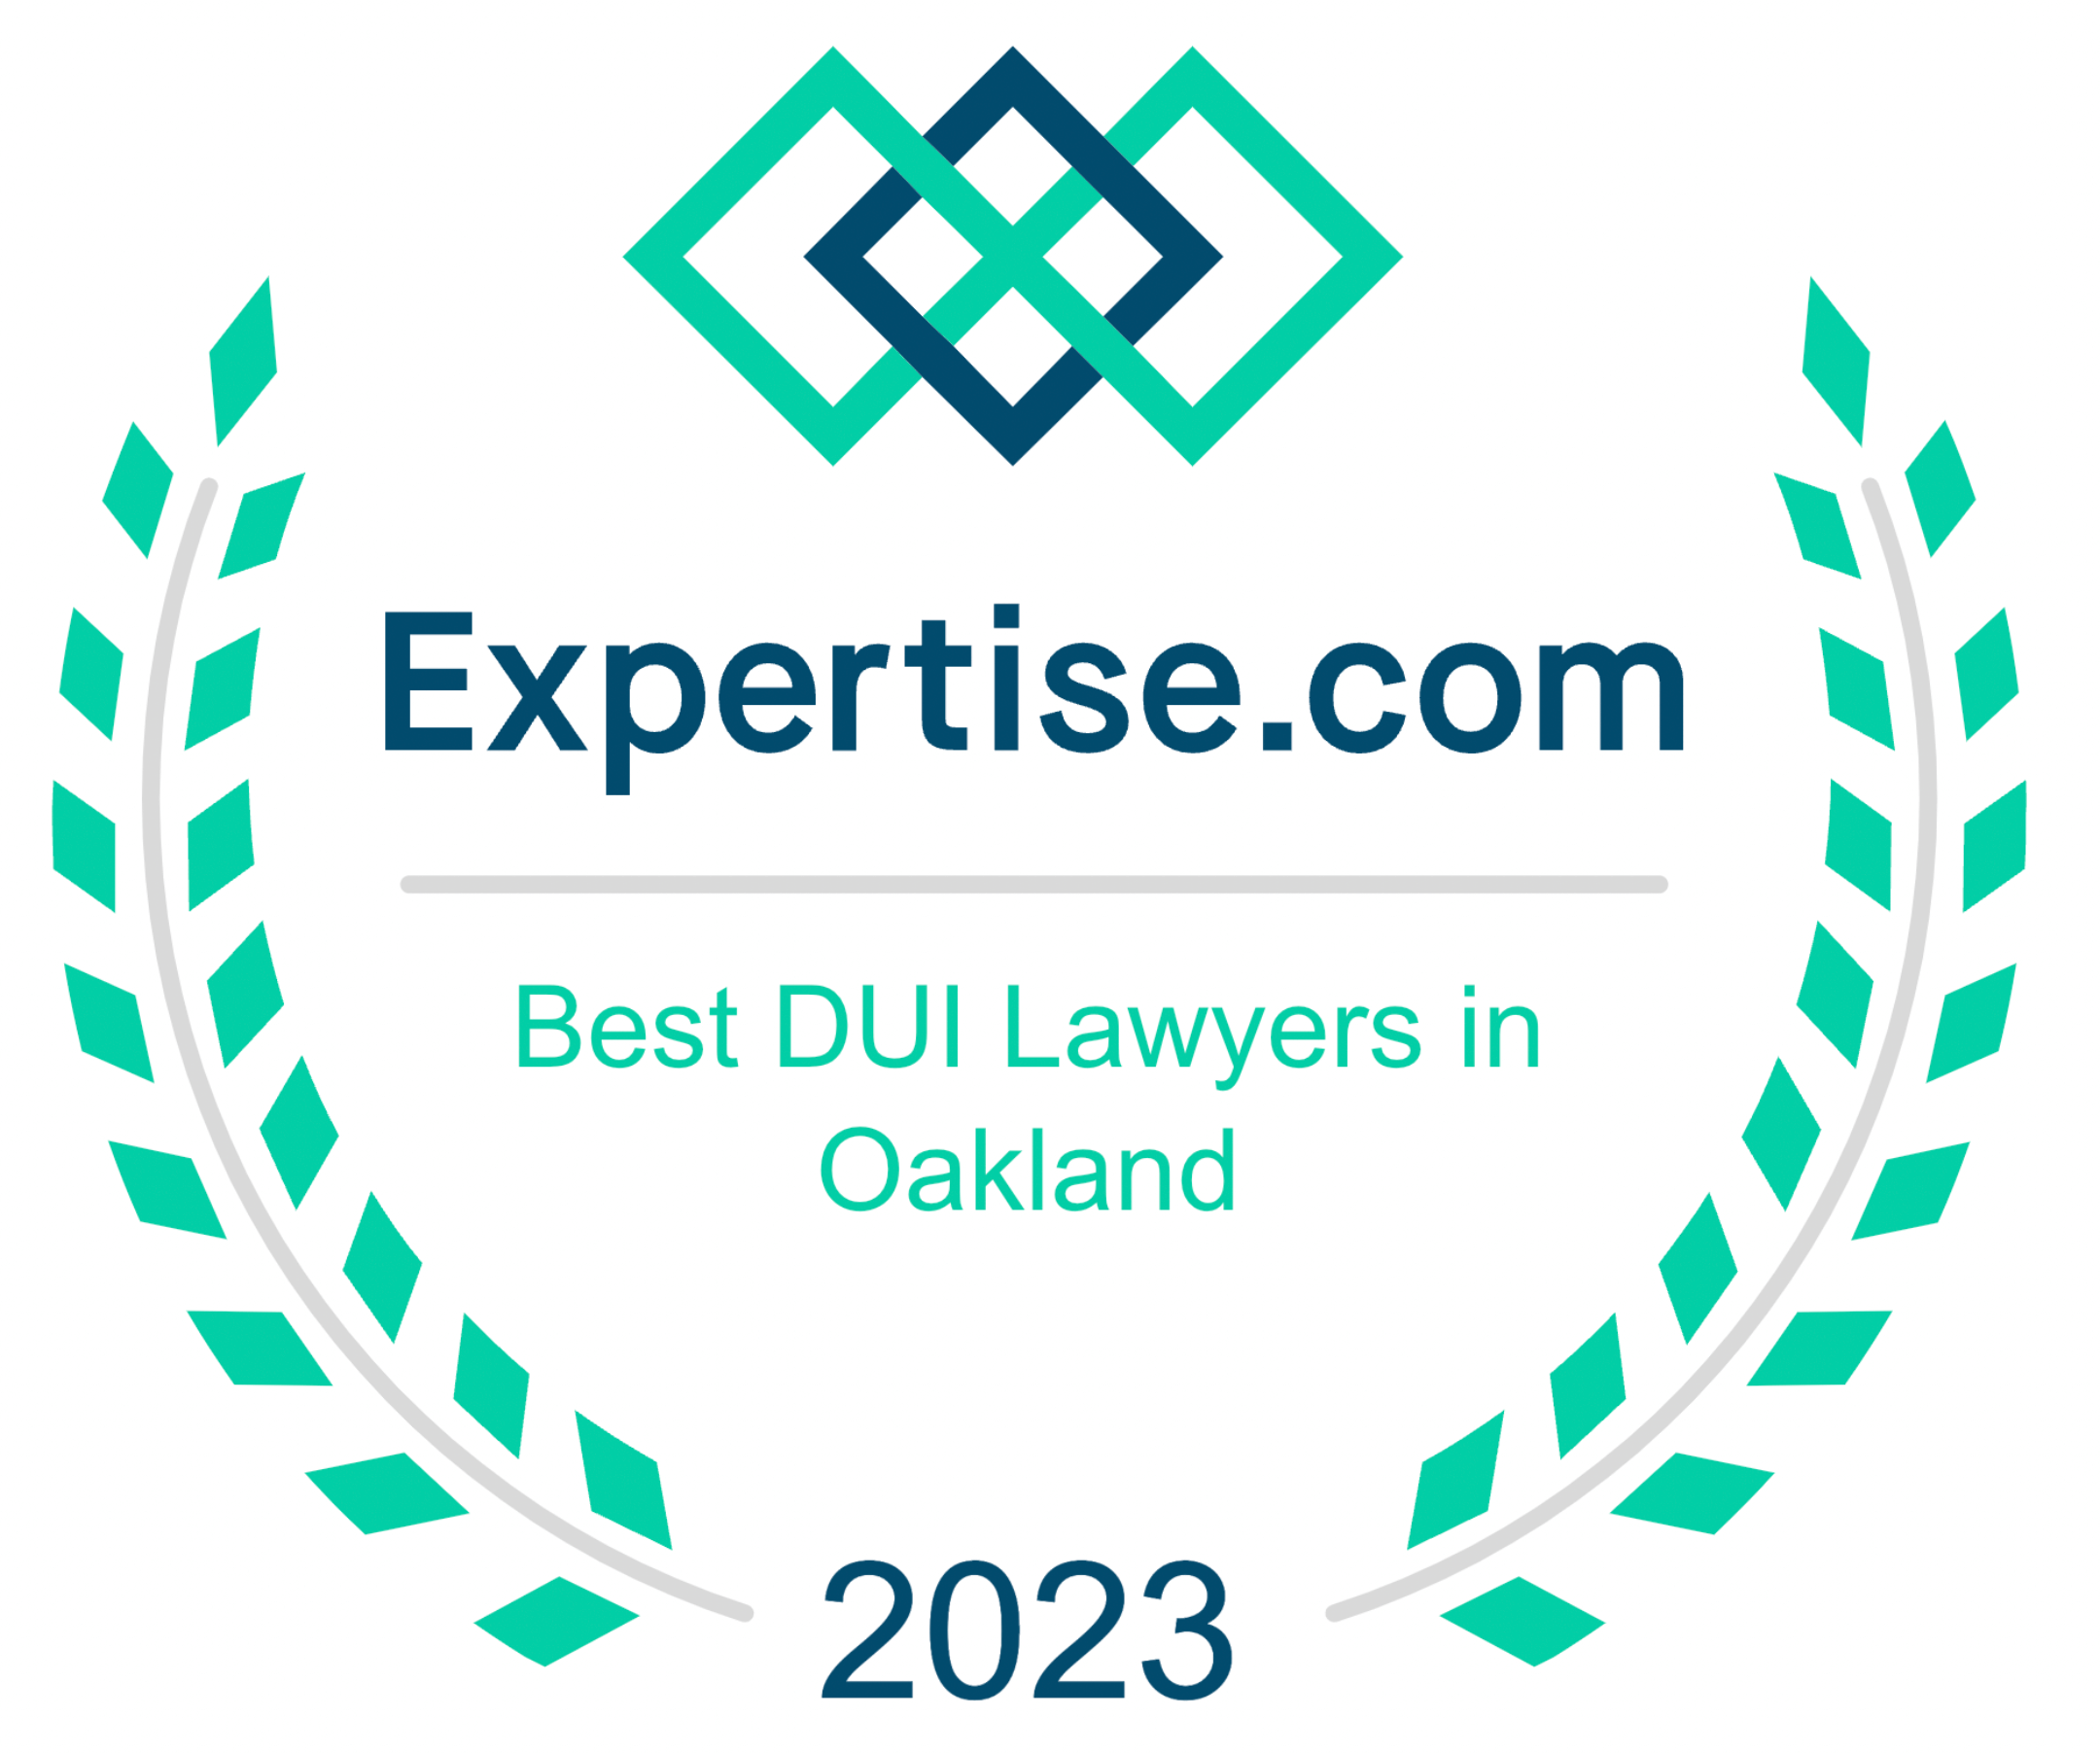 Expertise award for the 2023 Best DUI Lawyer in Oakland